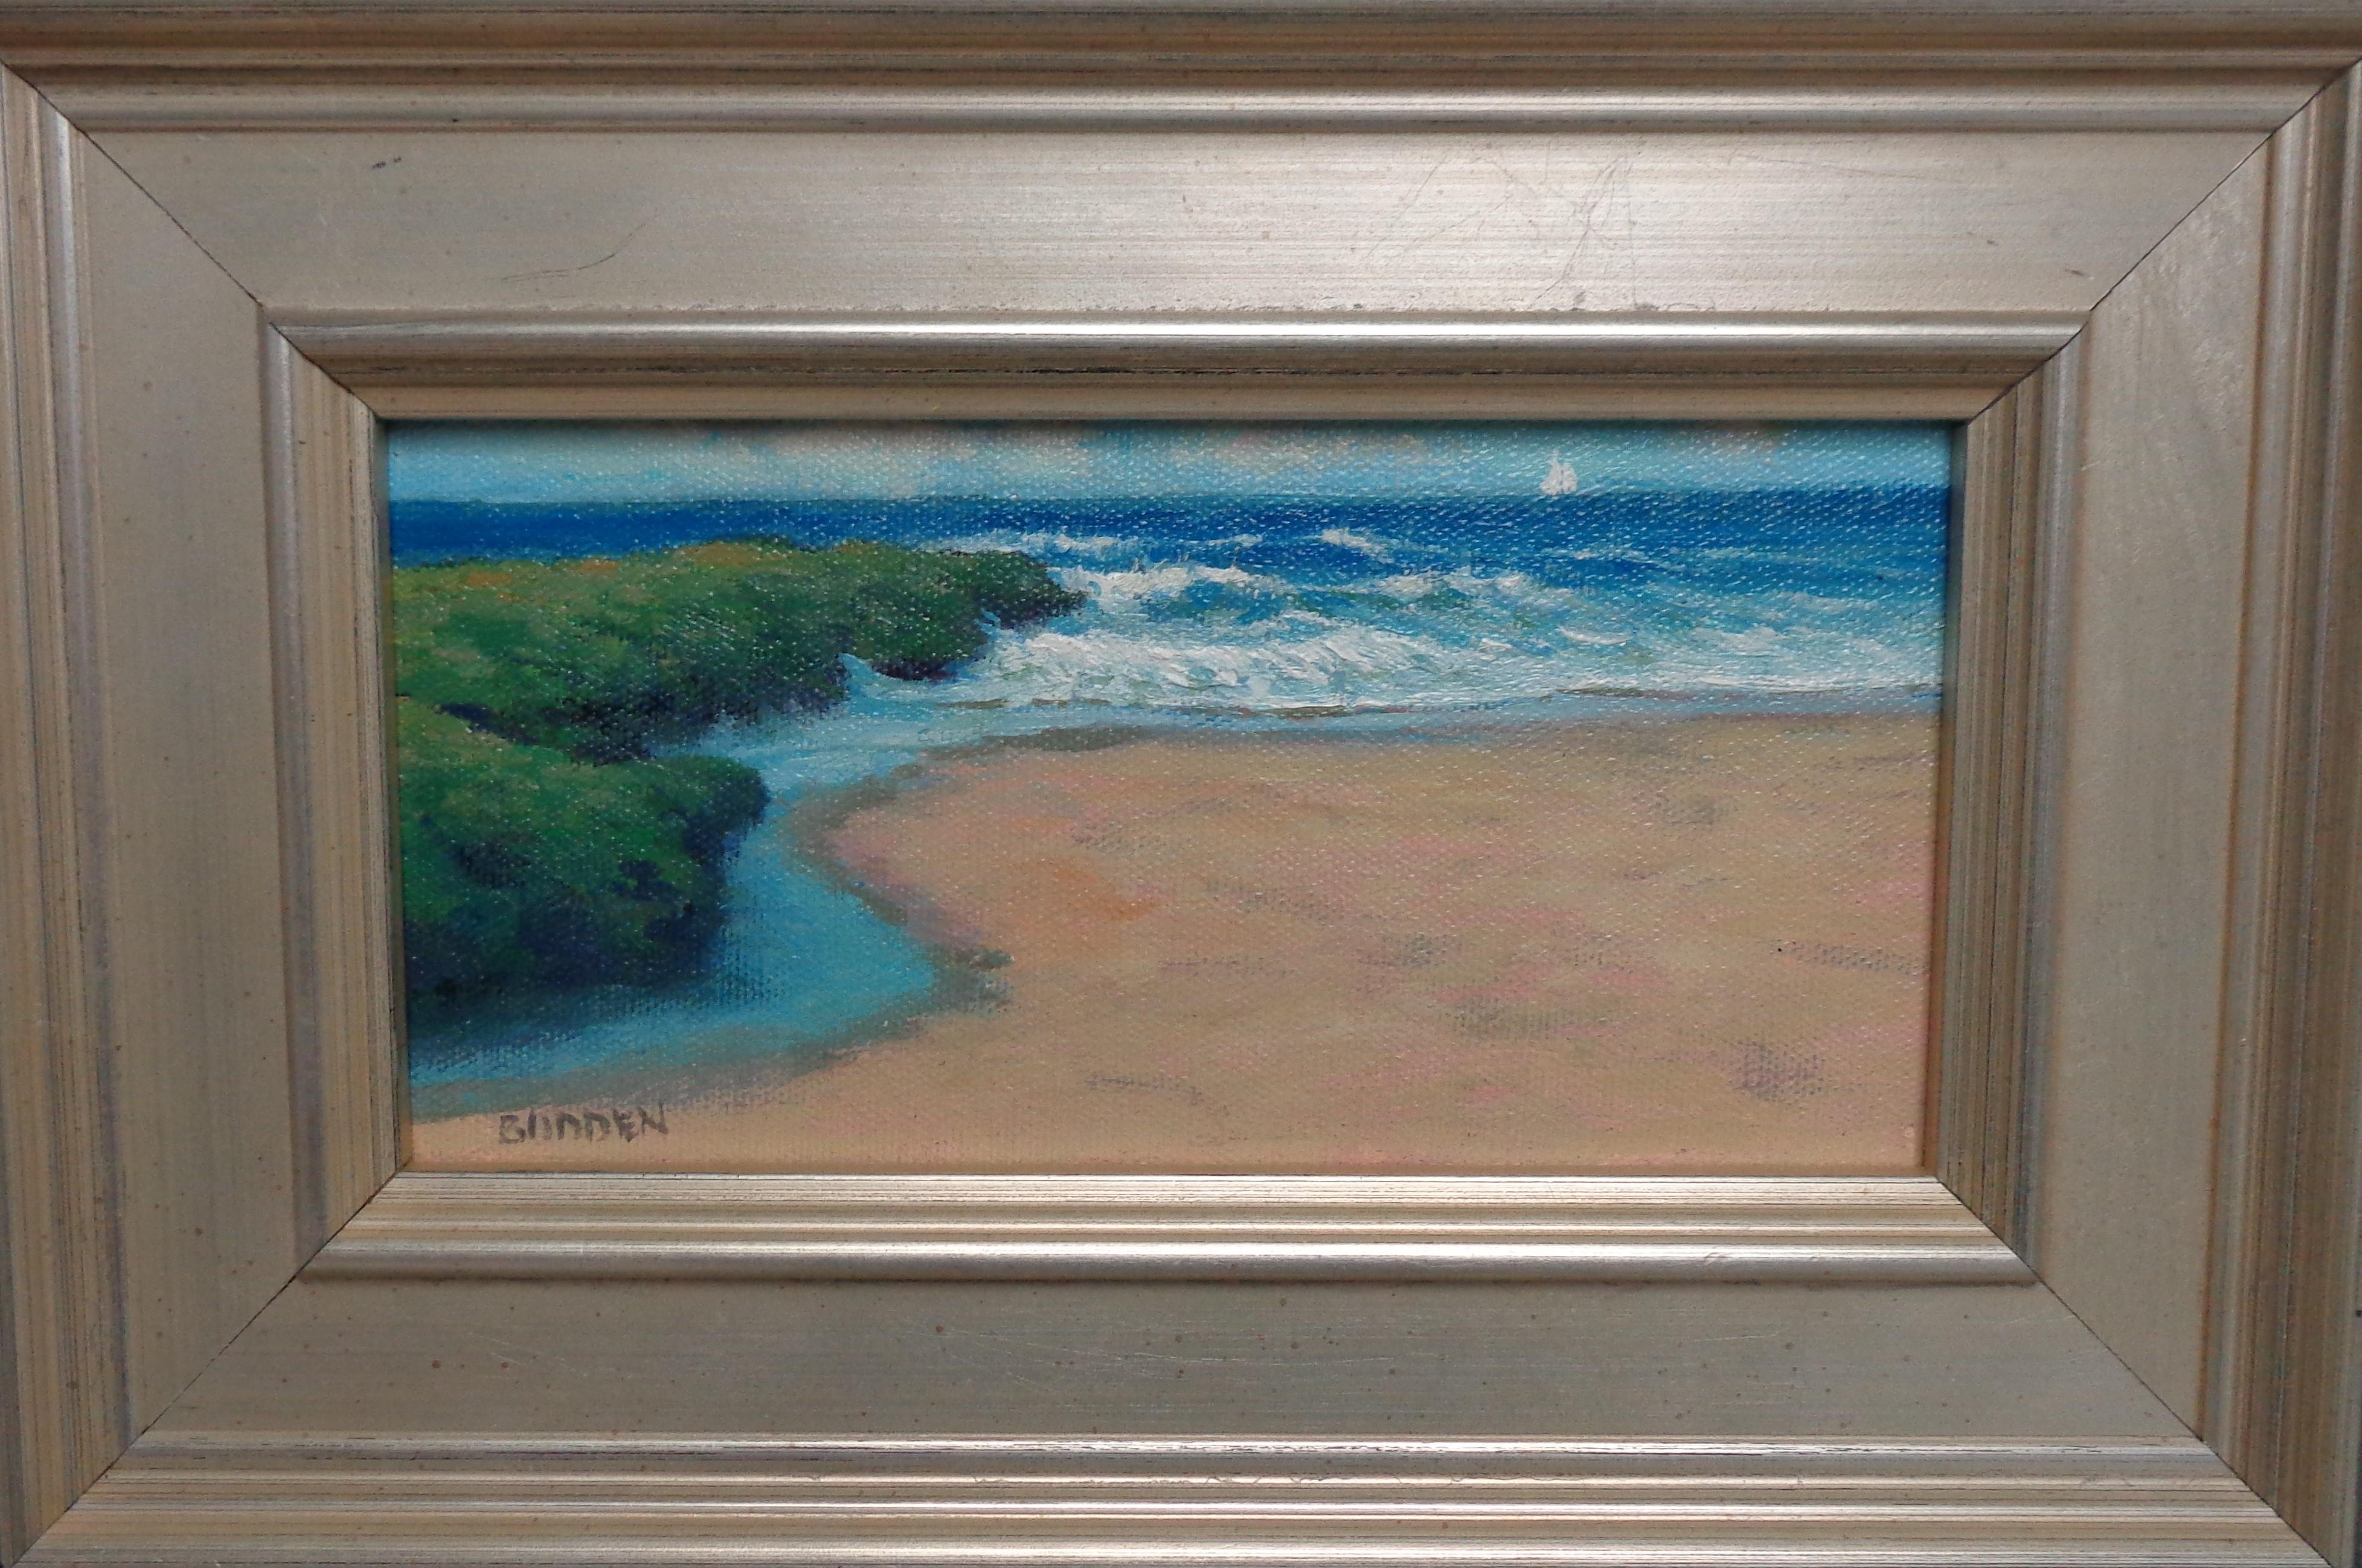 Off the Coast Seascape Study is an oil painting on canvas panel by award winning contemporary artist Michael Budden that showcases a beautiful beach scene created in an impressionistic realism style. The image measures 4 x 7.88 unframed and 7.63 x